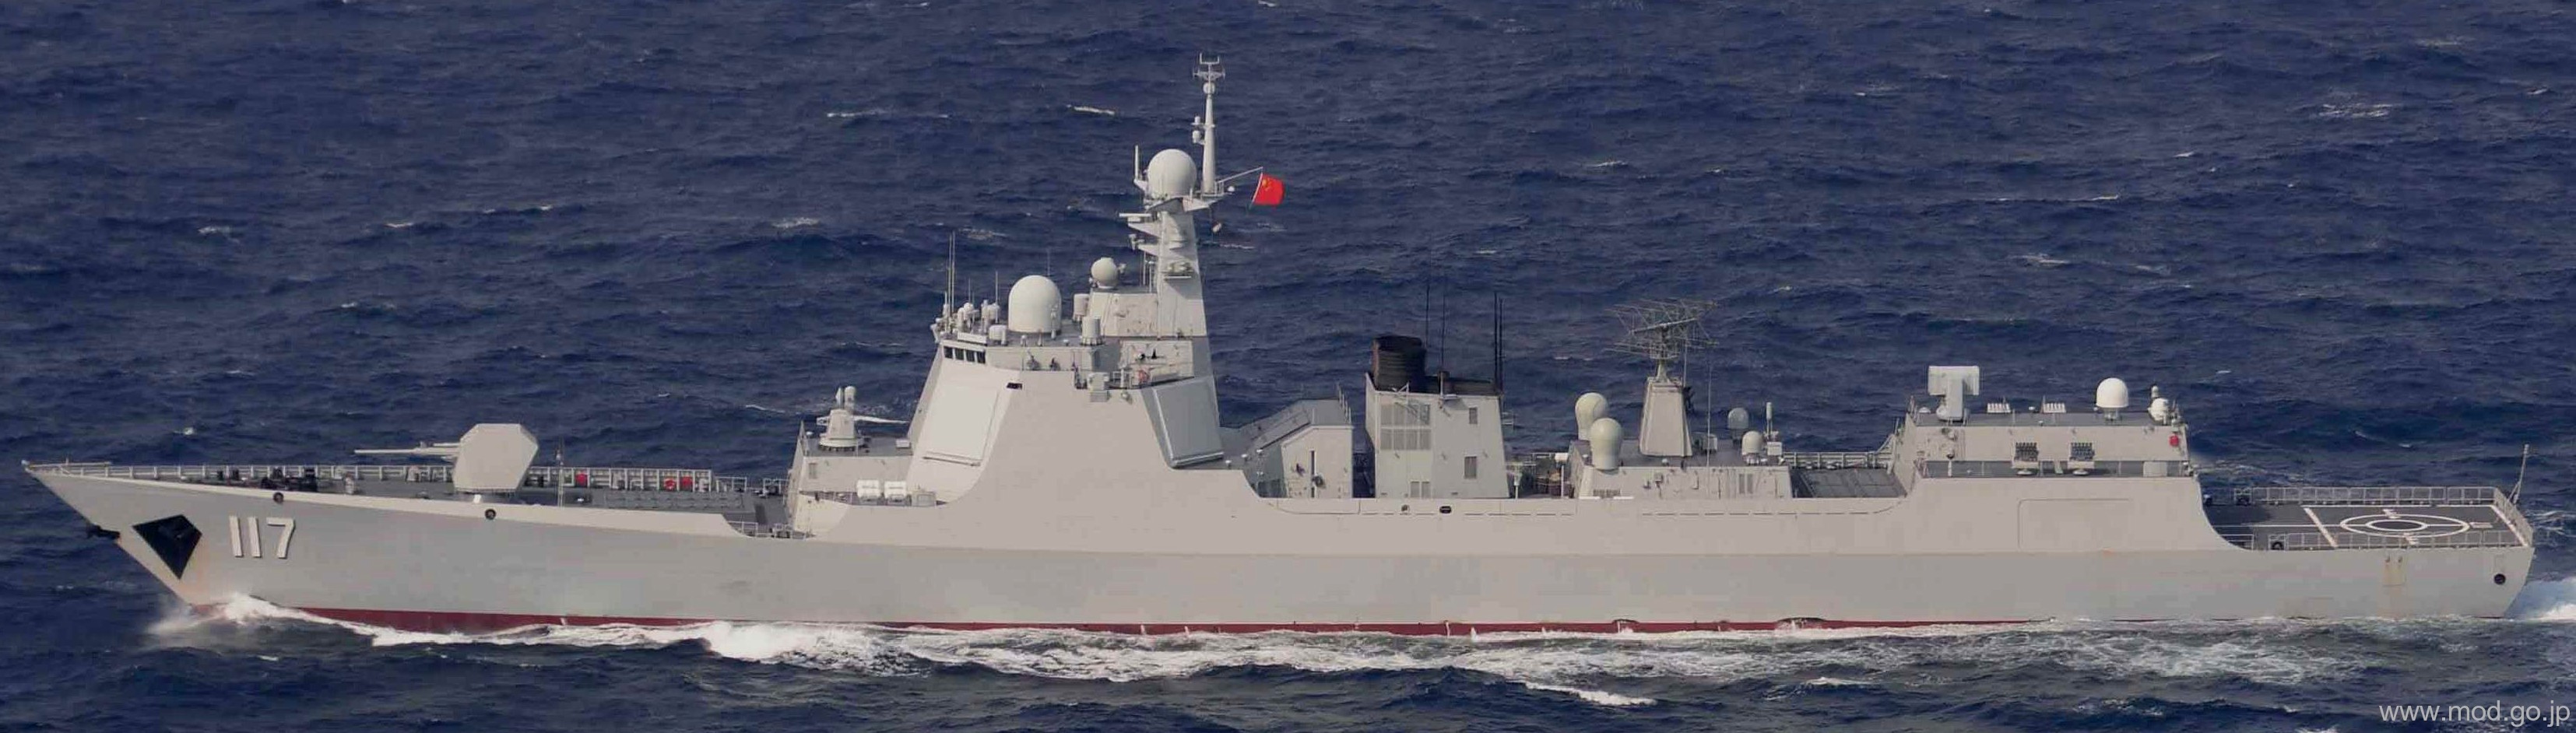 ddg-117 plans xining type 052d luyang class guided missile destroyer ddg china people's liberation army navy 02